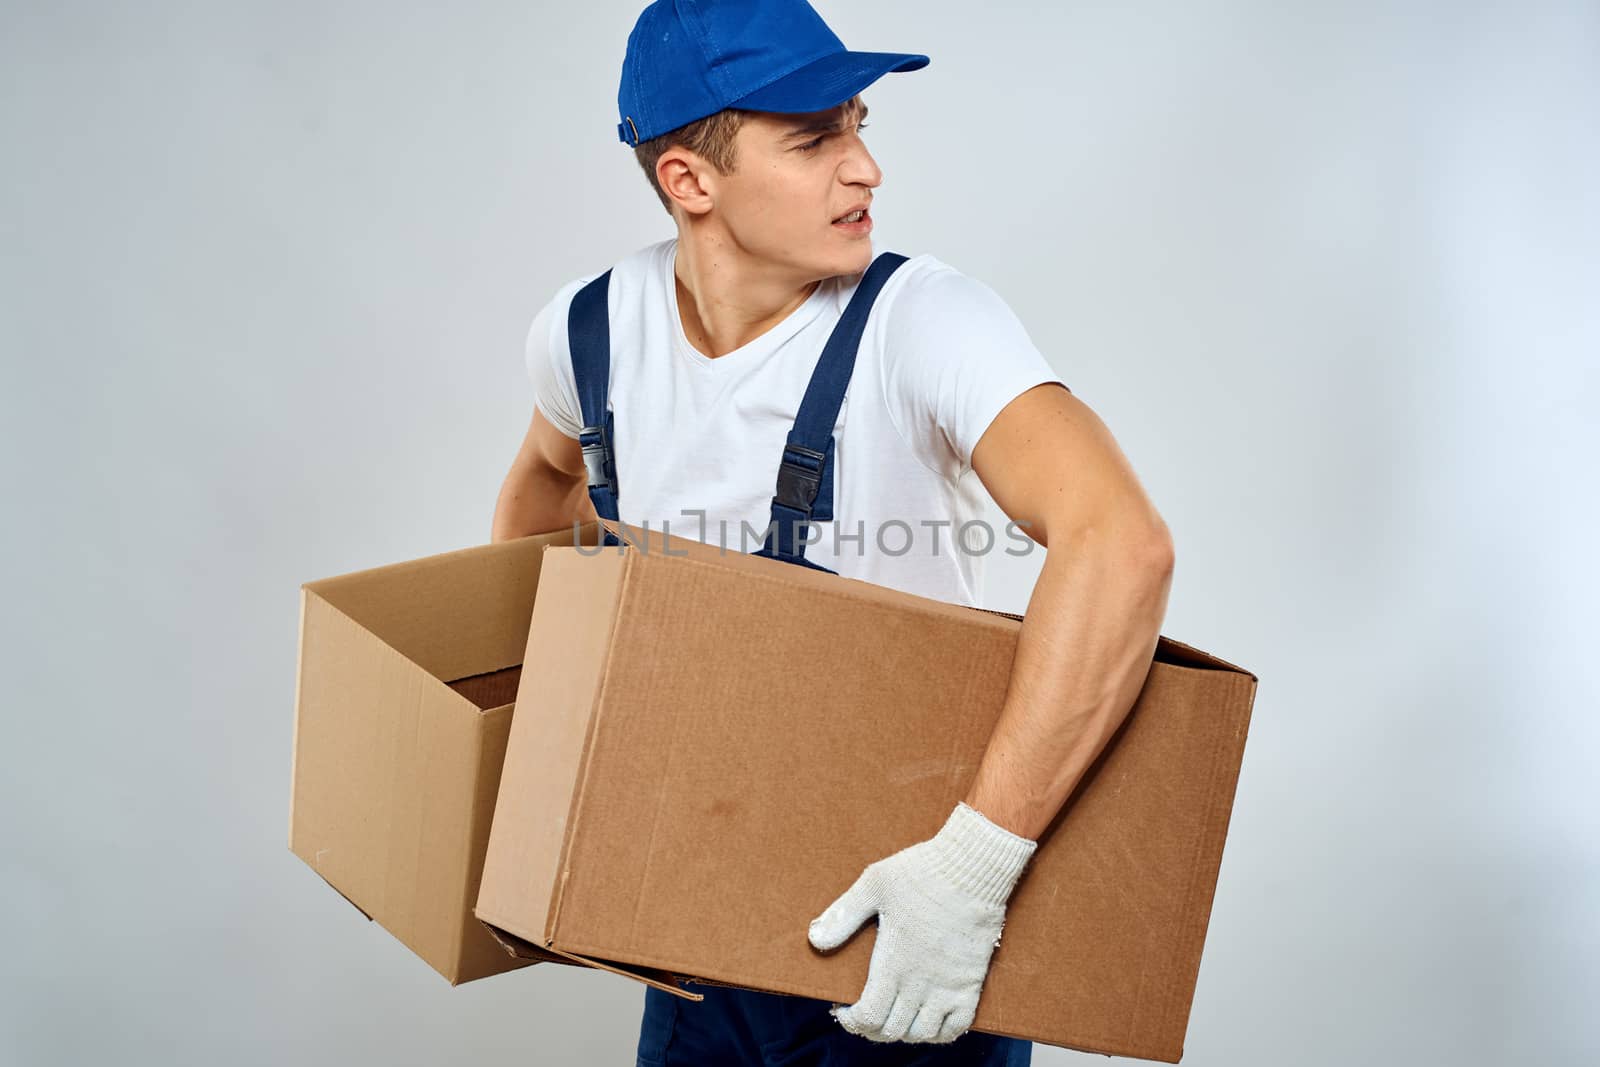 Man worker with box in hands delivery loading service packing service. High quality photo